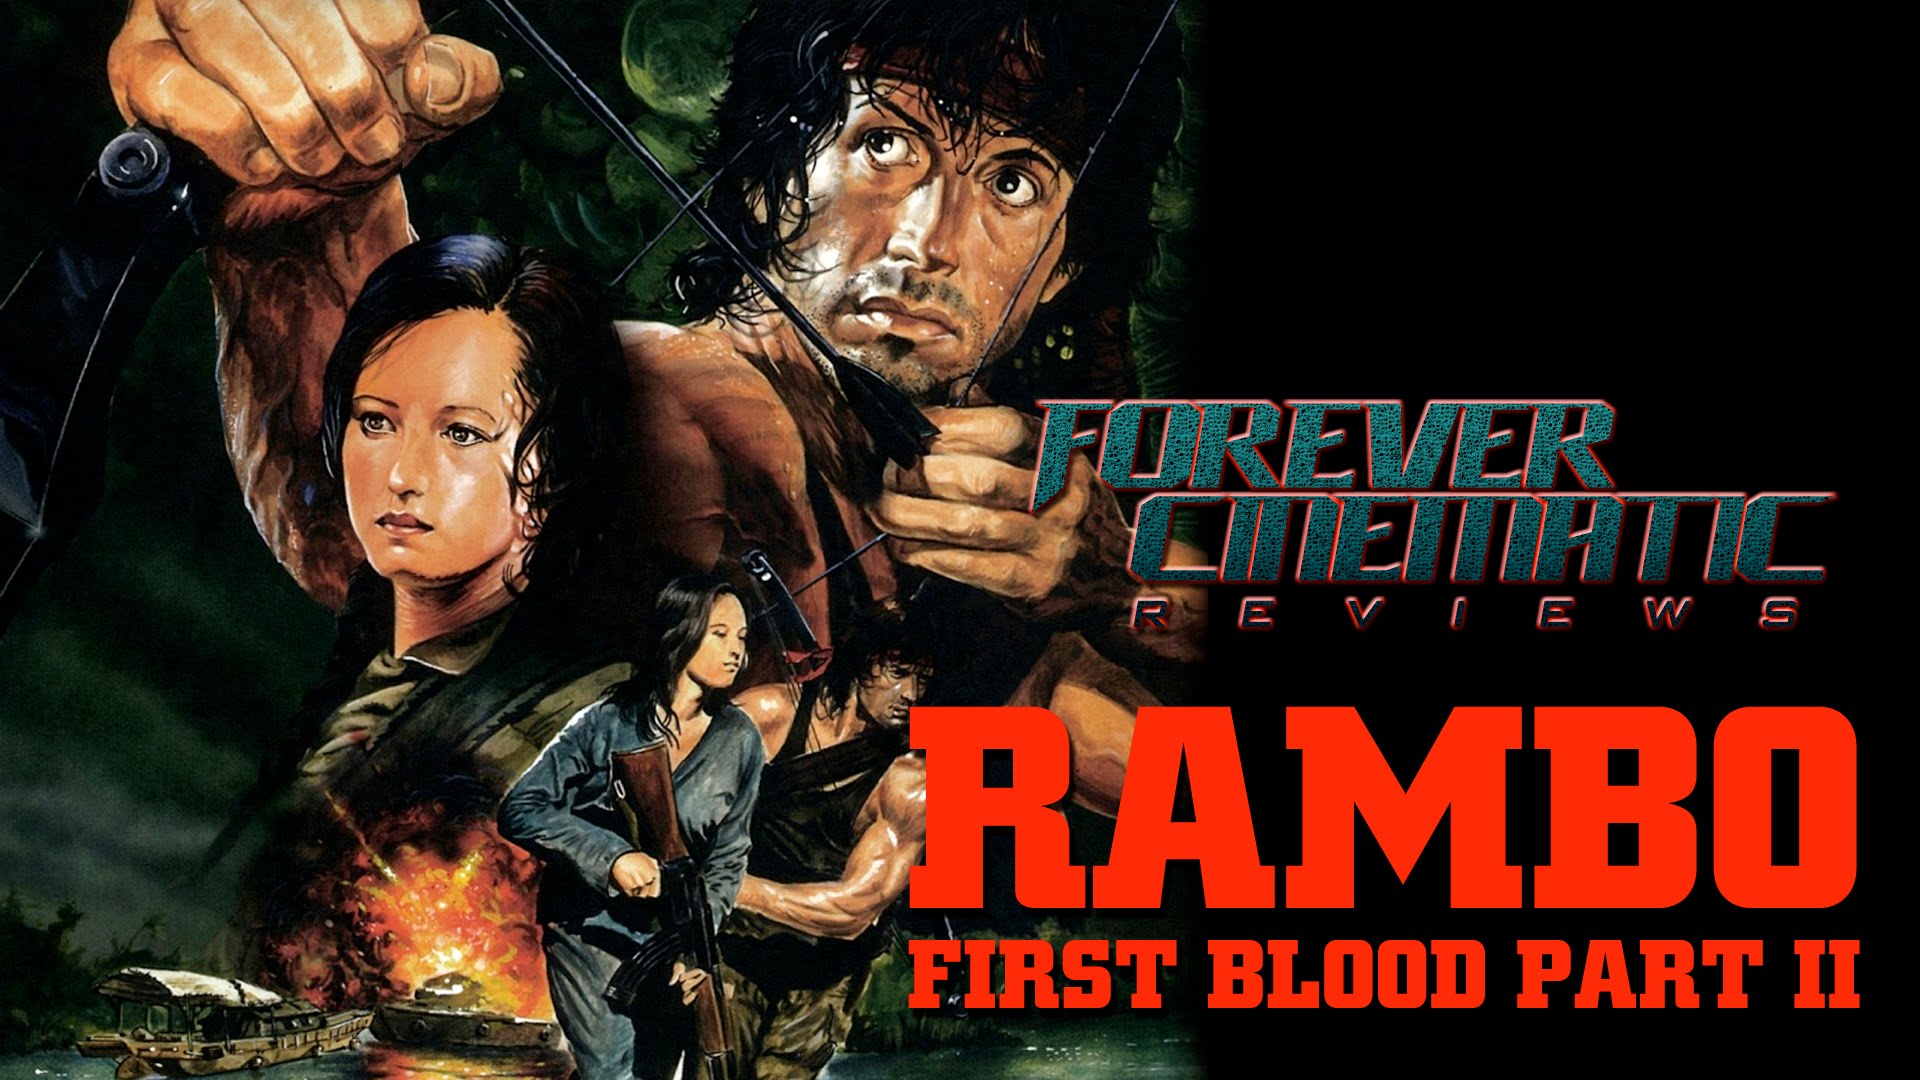 Rambo First Blood Part Ii Wallpapers Movie Hq Rambo First Blood Part Ii Pictures 4k Wallpapers 19